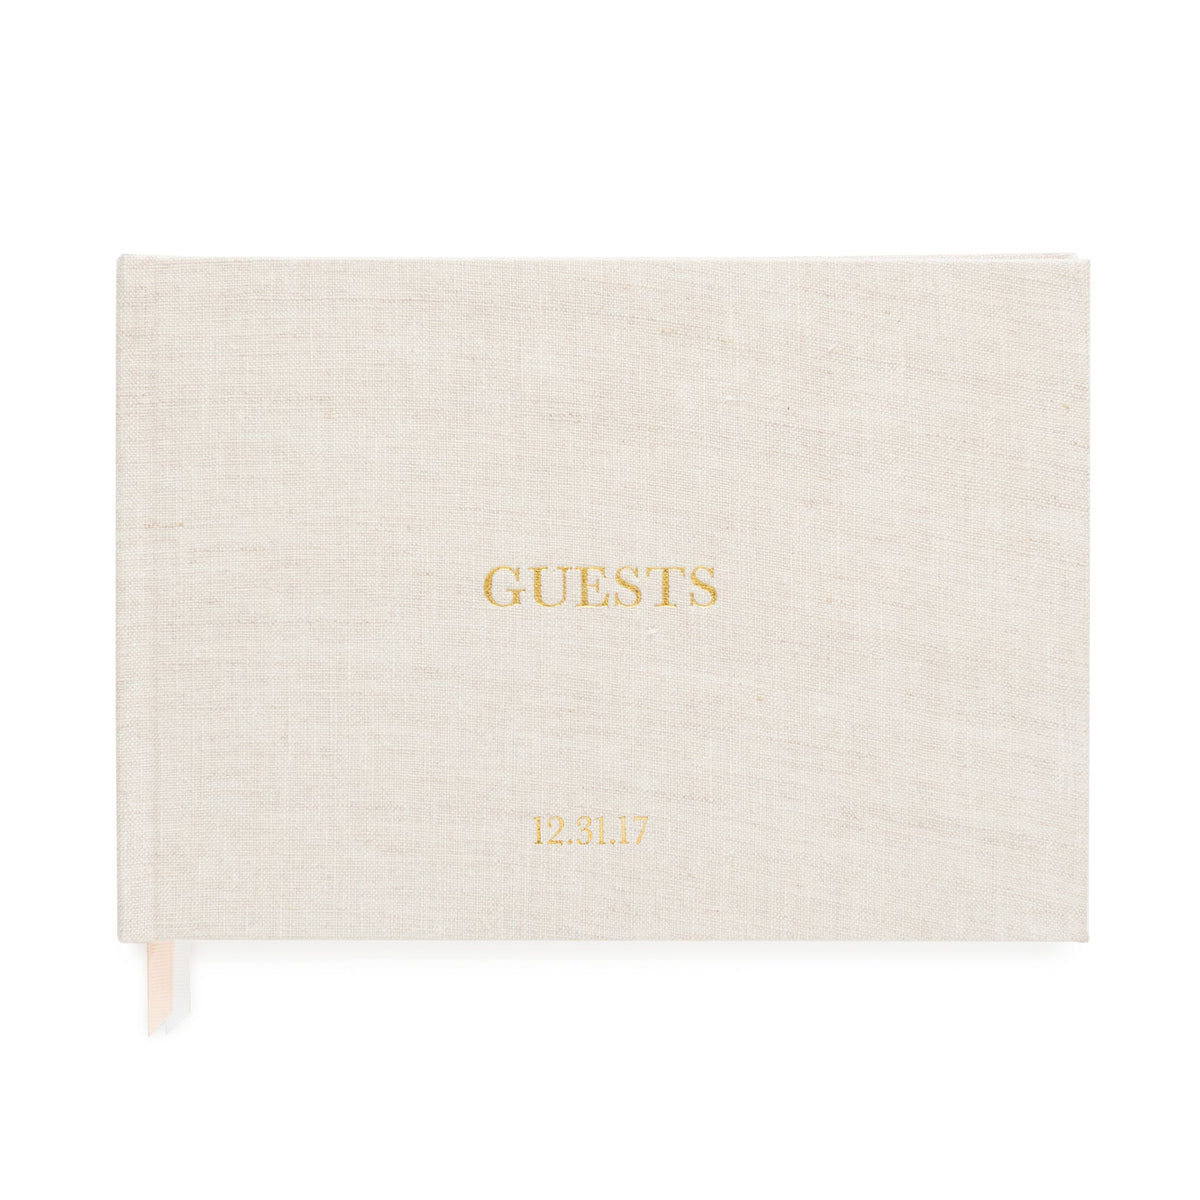 flax guest book with personalization